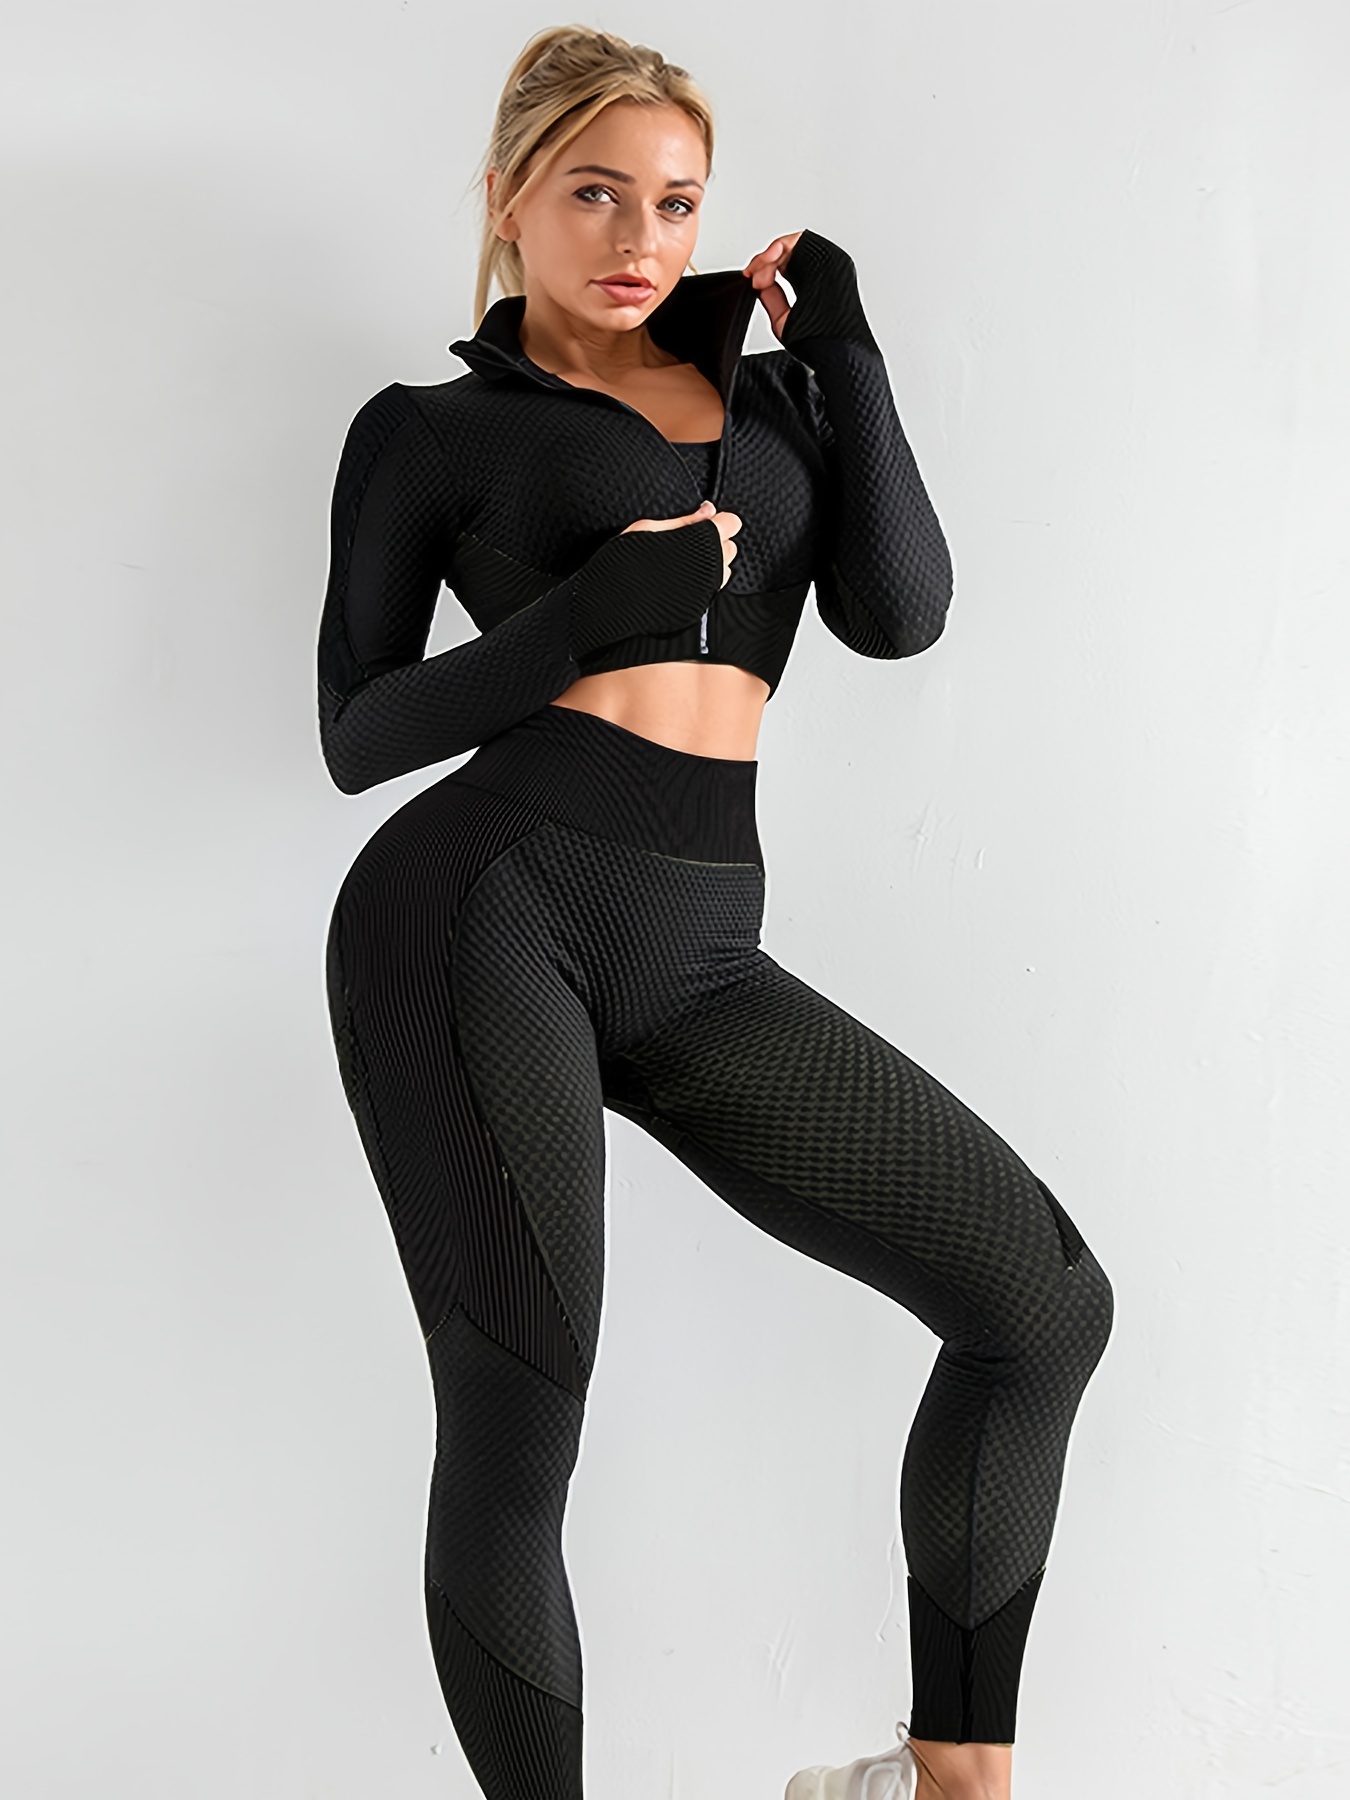 Seamless Gym Set For Women Exercise Leggings And Padded Sports Bras  Seamless Gym Wear For Yoga And Sports Available In Sizes S L From Dwtrade,  $25.63